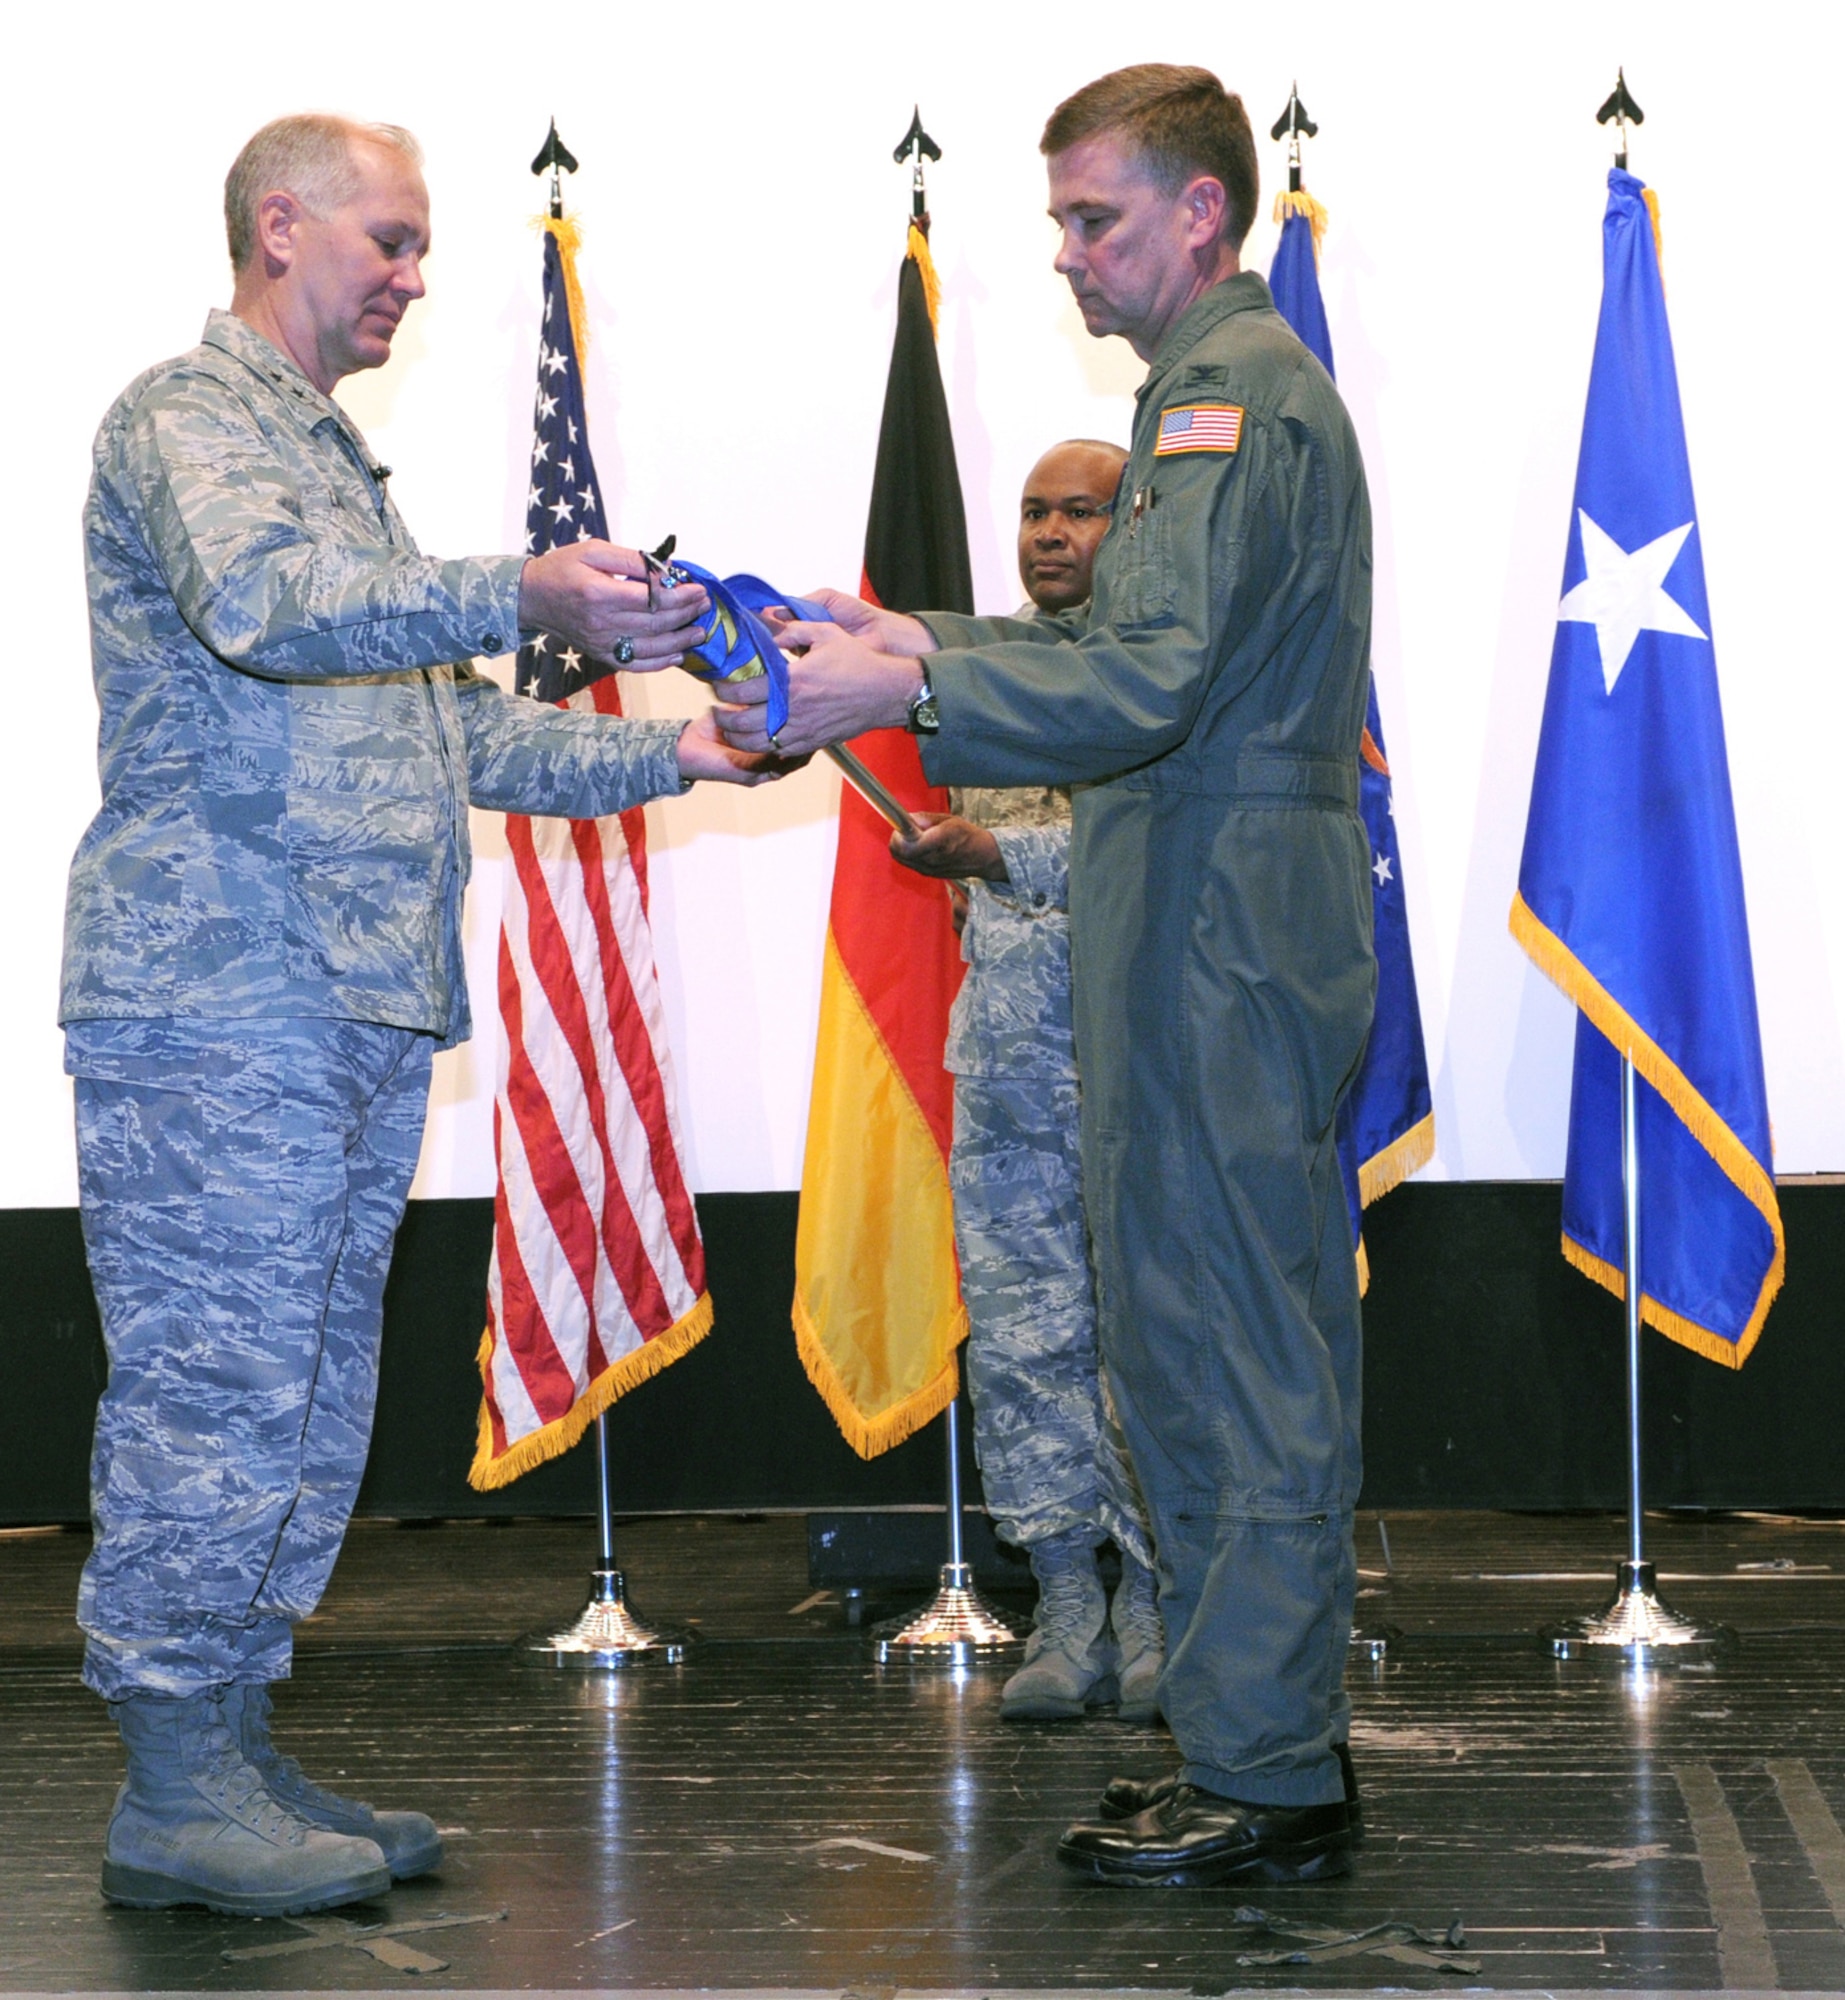 Seventeenth Air Force Commander Maj. Gen. Ron Ladnier (left), and 617th Air and Space Operations Center Commander Col. Andy Redmond (right) unfurl the 617th flag at an activation ceremony May 29 at Ramstein while AOC Superintendant Senior Master Sgt. Mike Topps assists. The ceremony marked the official standup of the AOC, the nerve center for command and control within 17th AF, the air component for U.S. Africa Command. The 617th AOC will oversee all air operations in the African area of activity. (USAF photo by Master Sgt. Jim Fisher)  